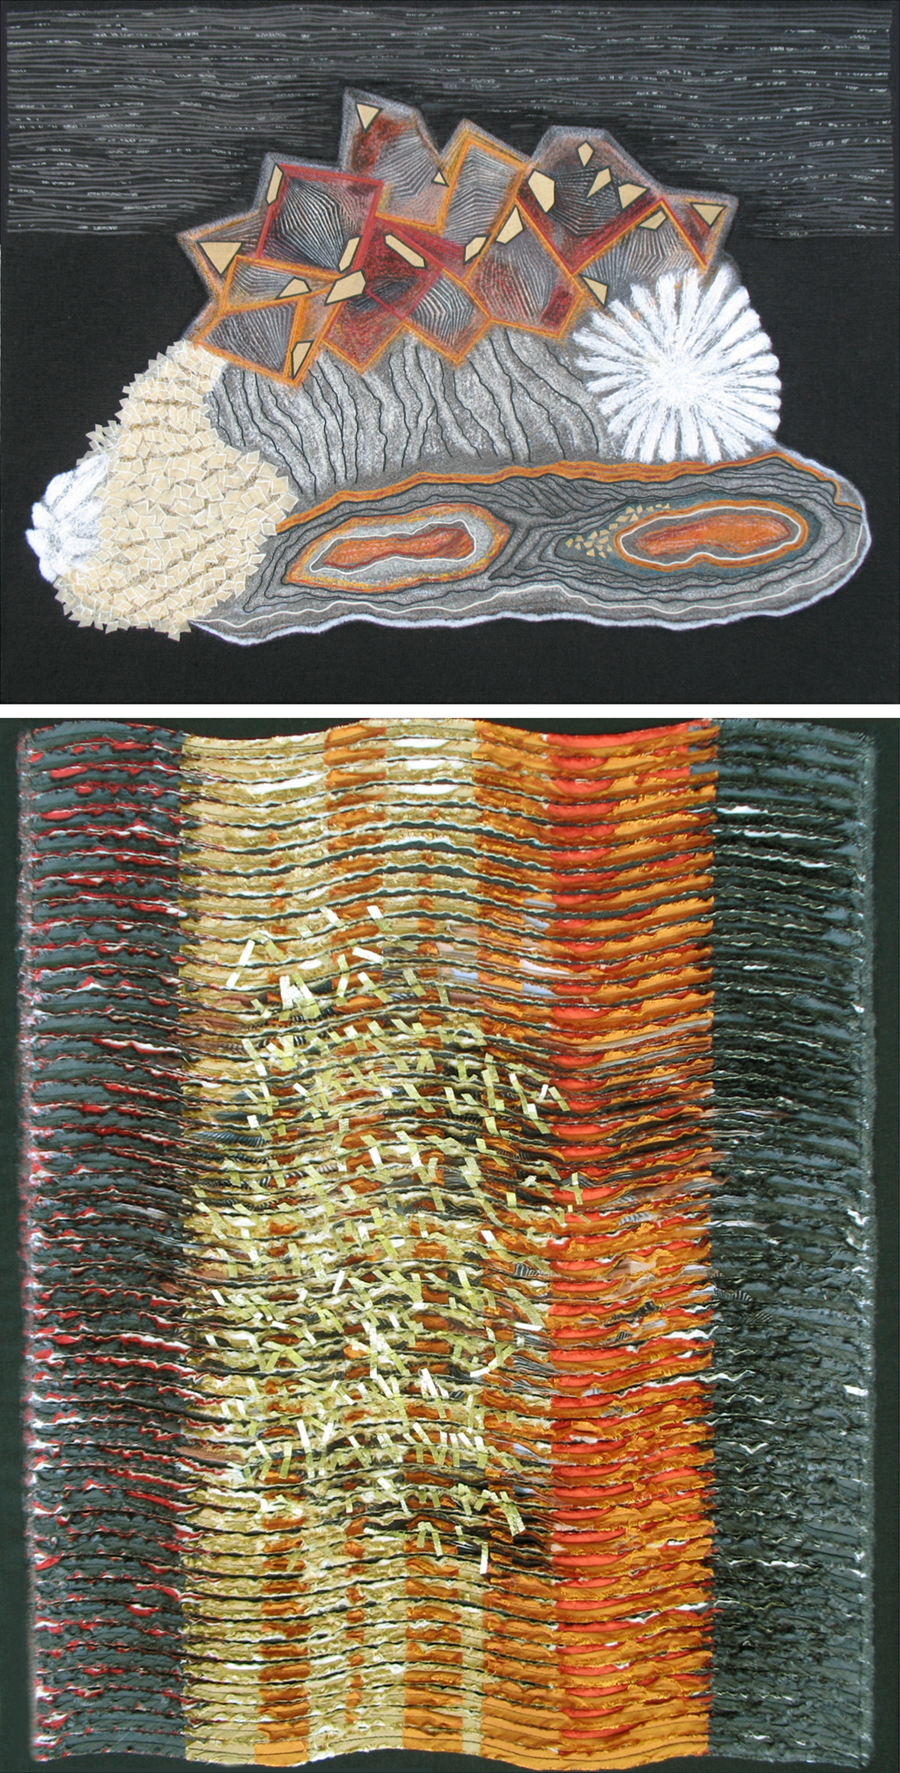 Mineral in Composition, diptych